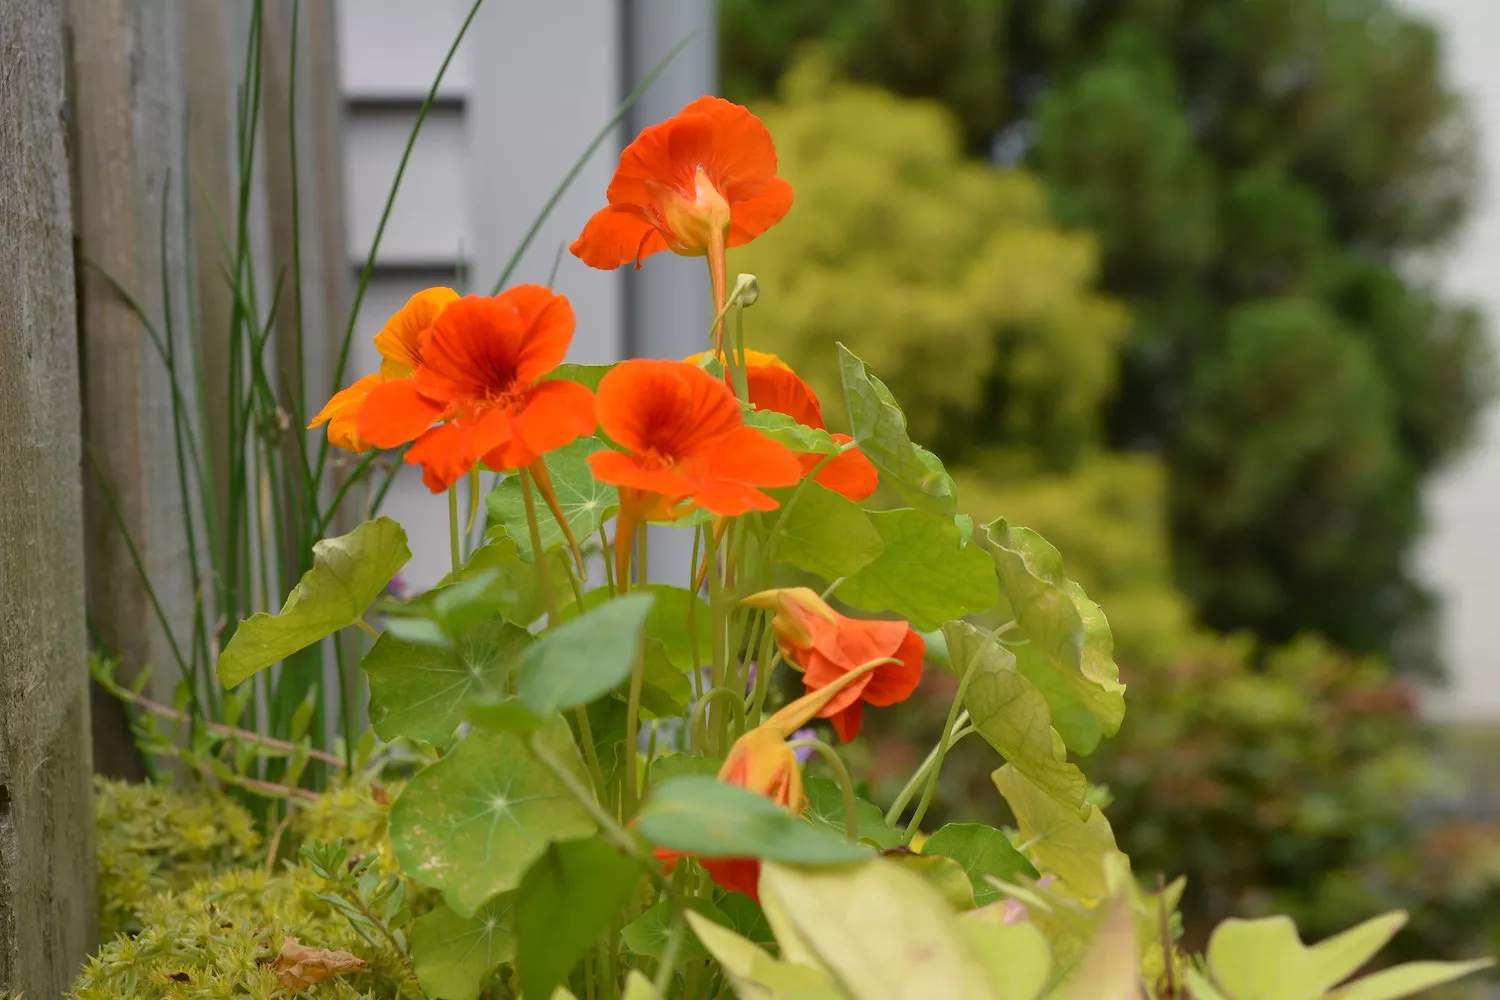 Bright, orange-red nasturtium flowers stand tall along the side of a house